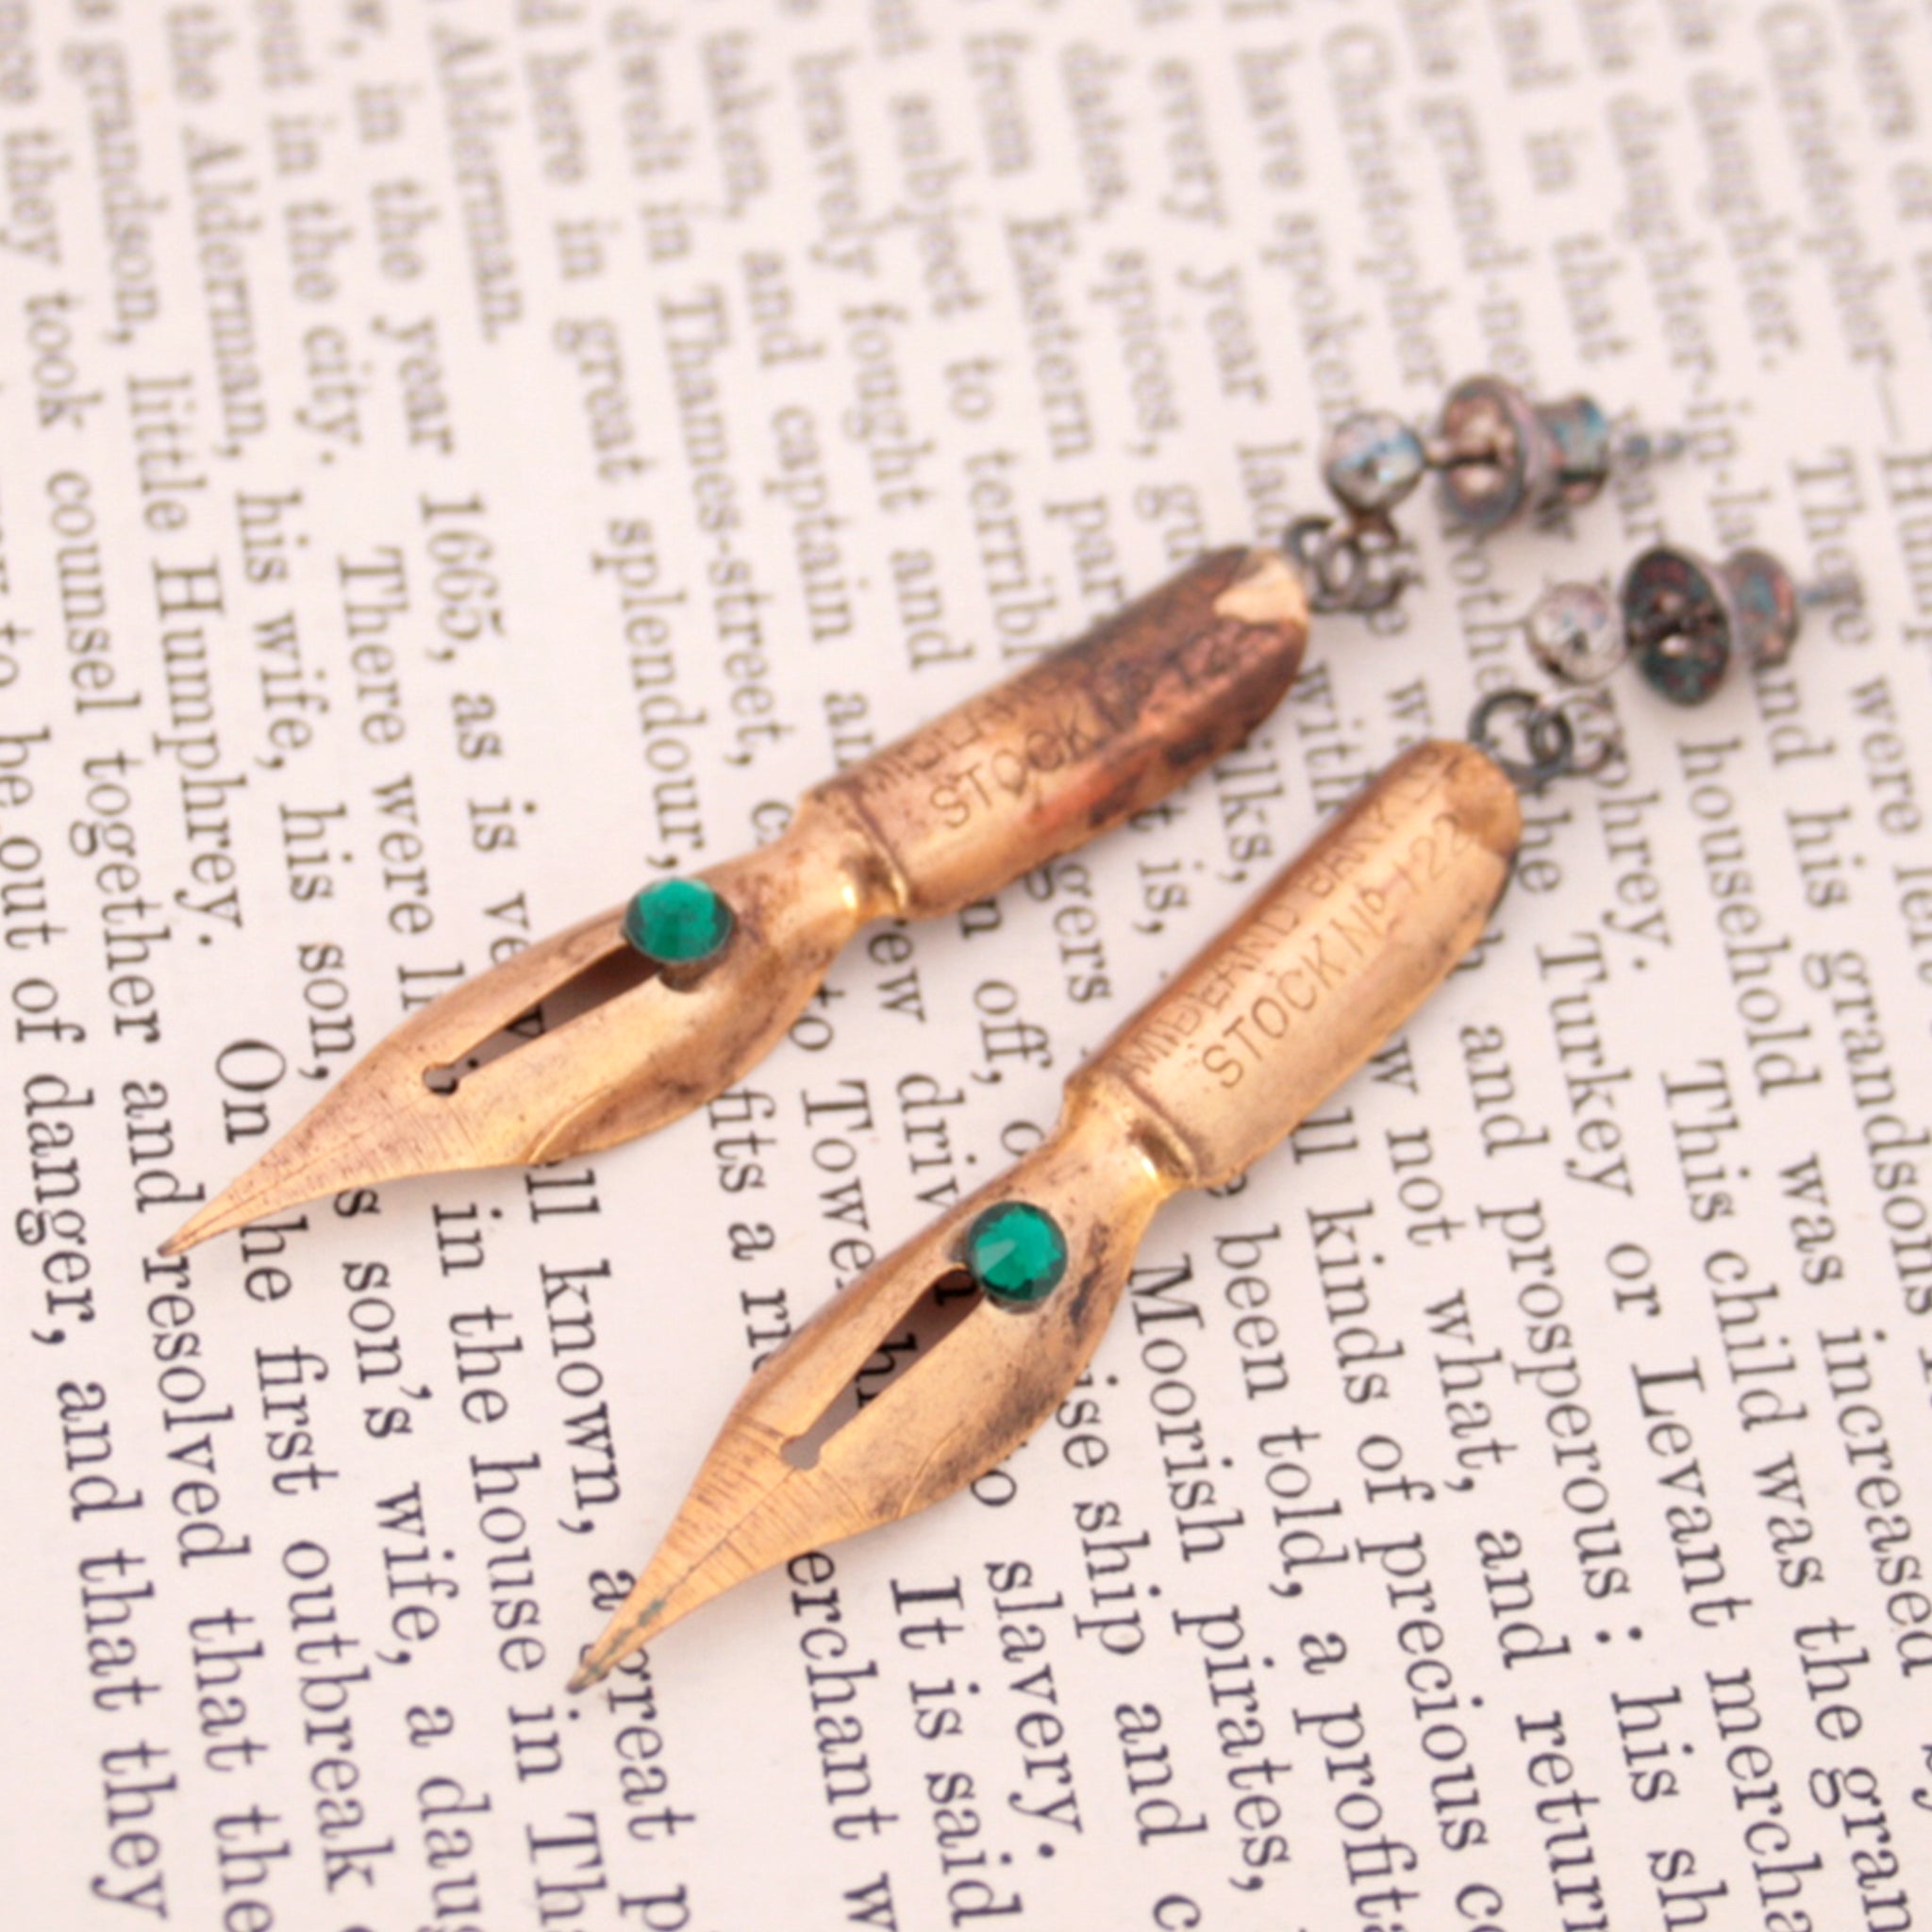 gold earrings made of real pen nibs with turquoise crystals lying on an old newspaper